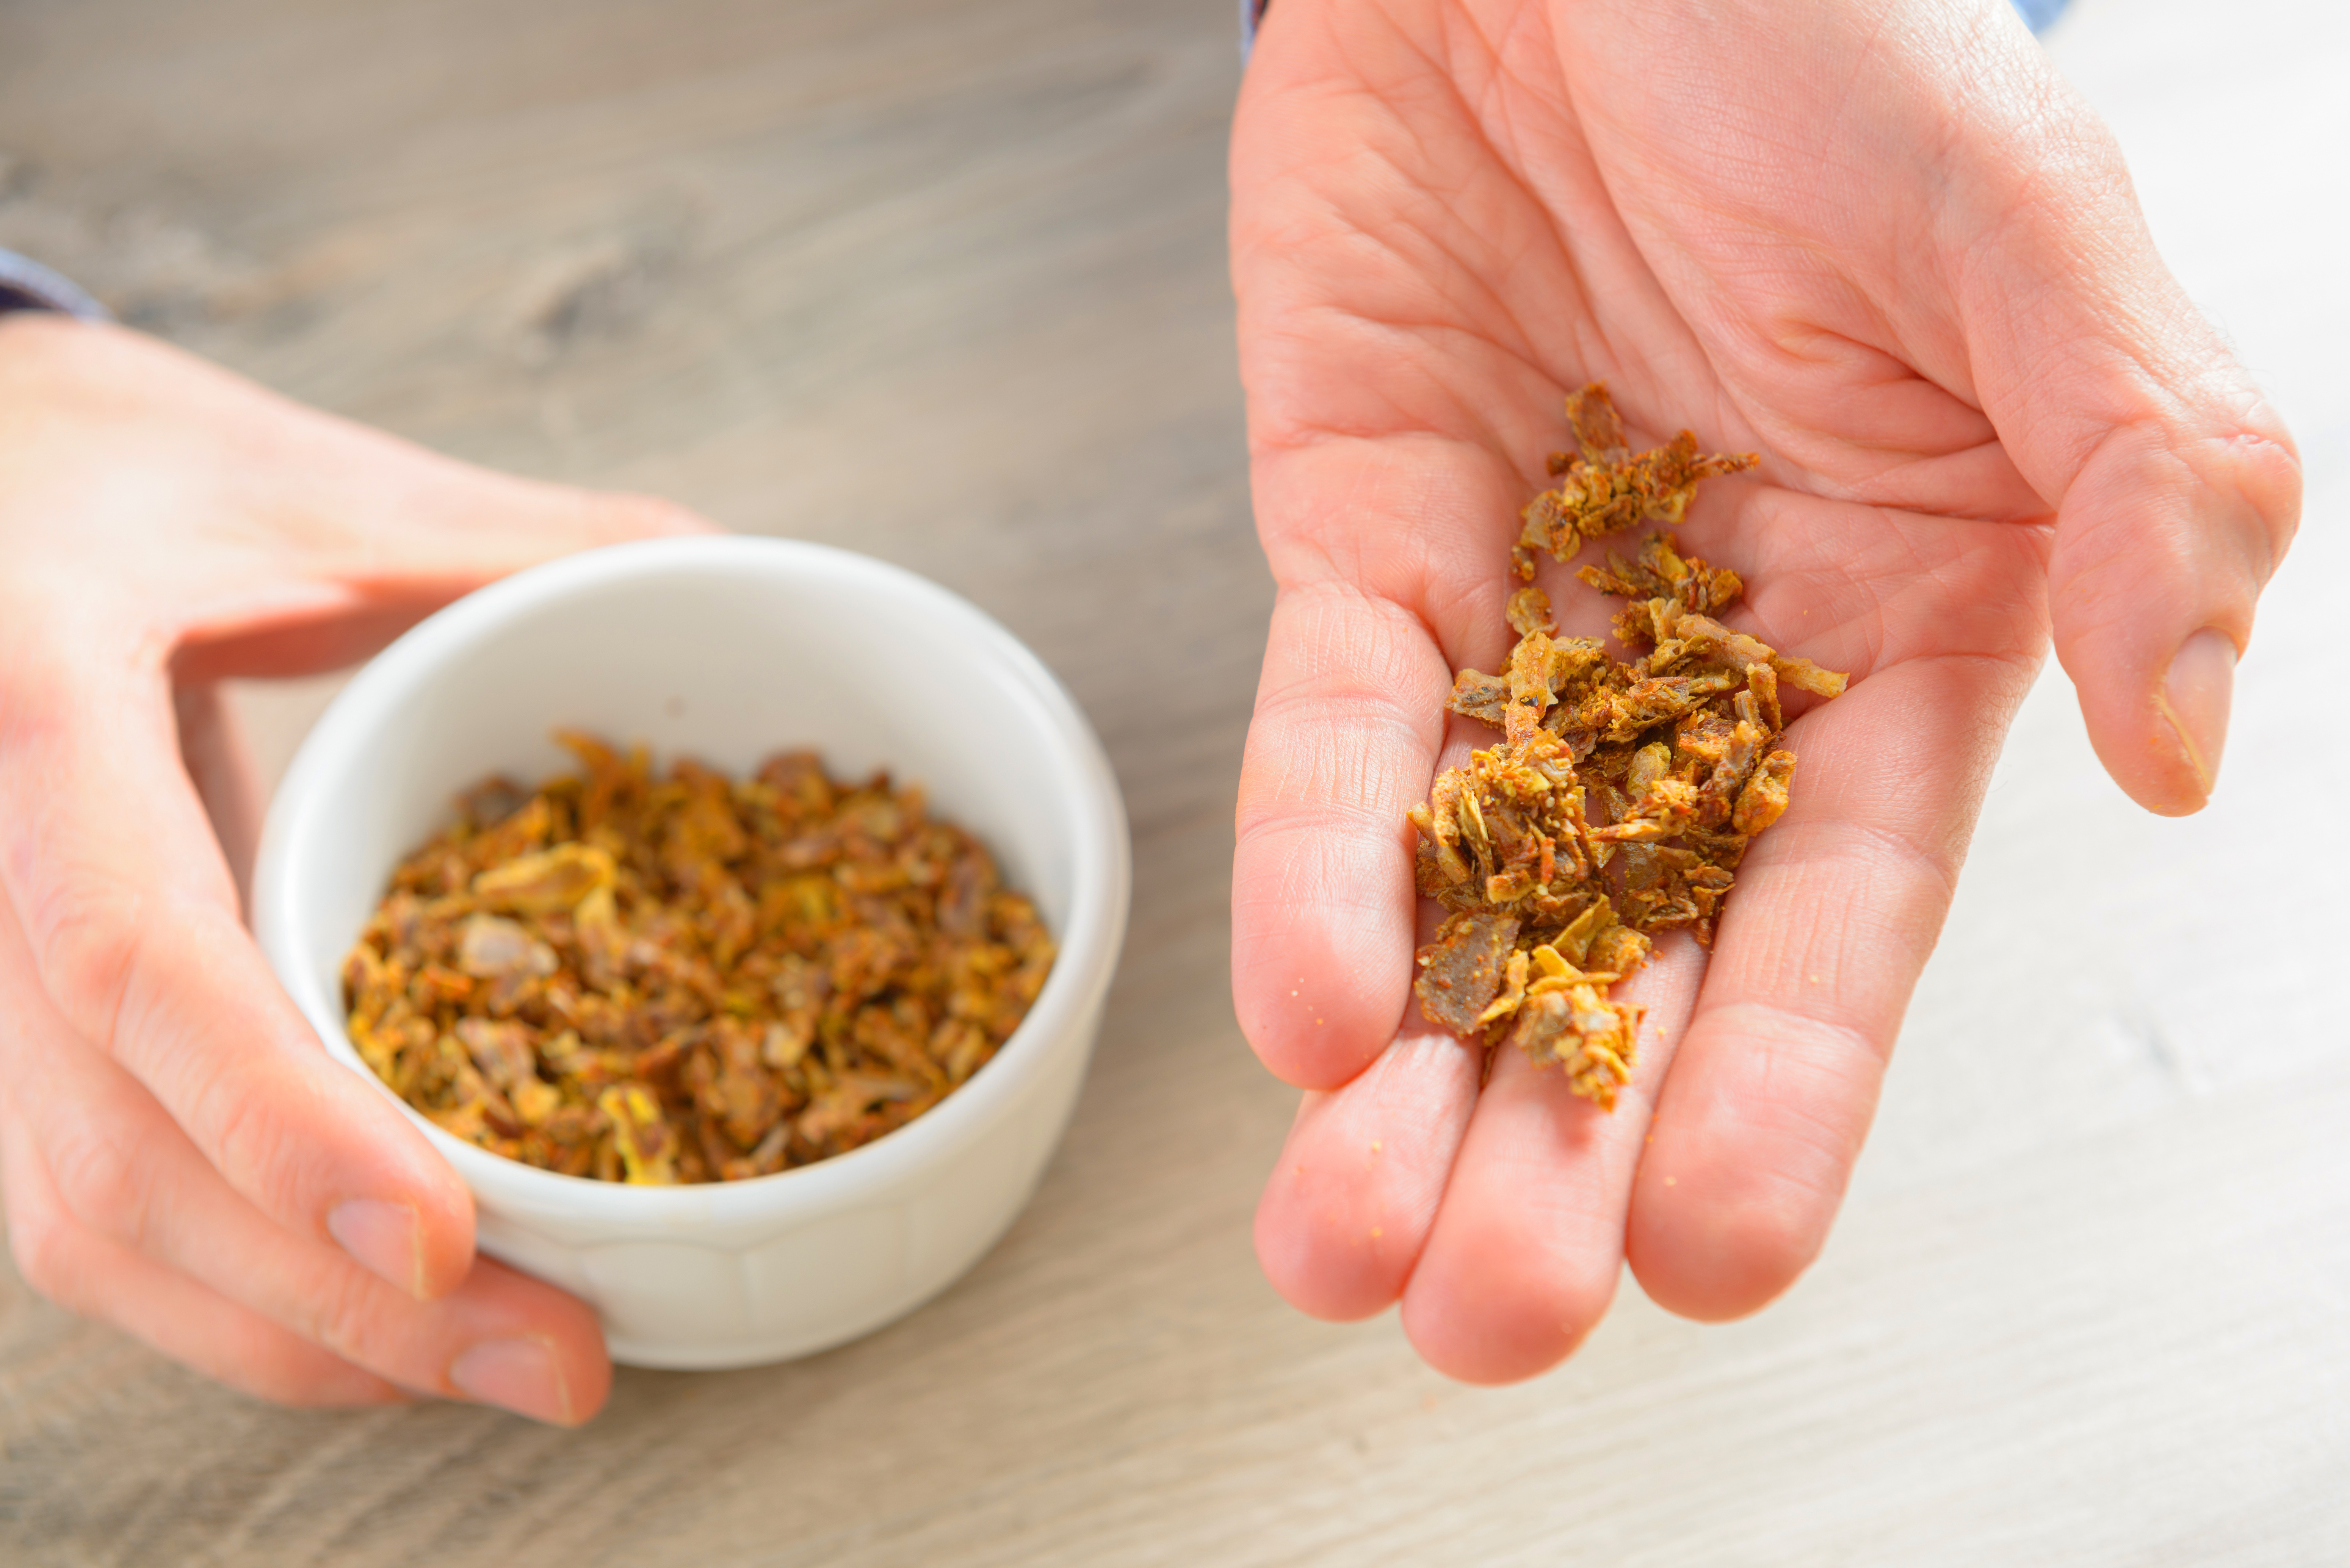  Propolis: The answer to antibiotic resistance? 